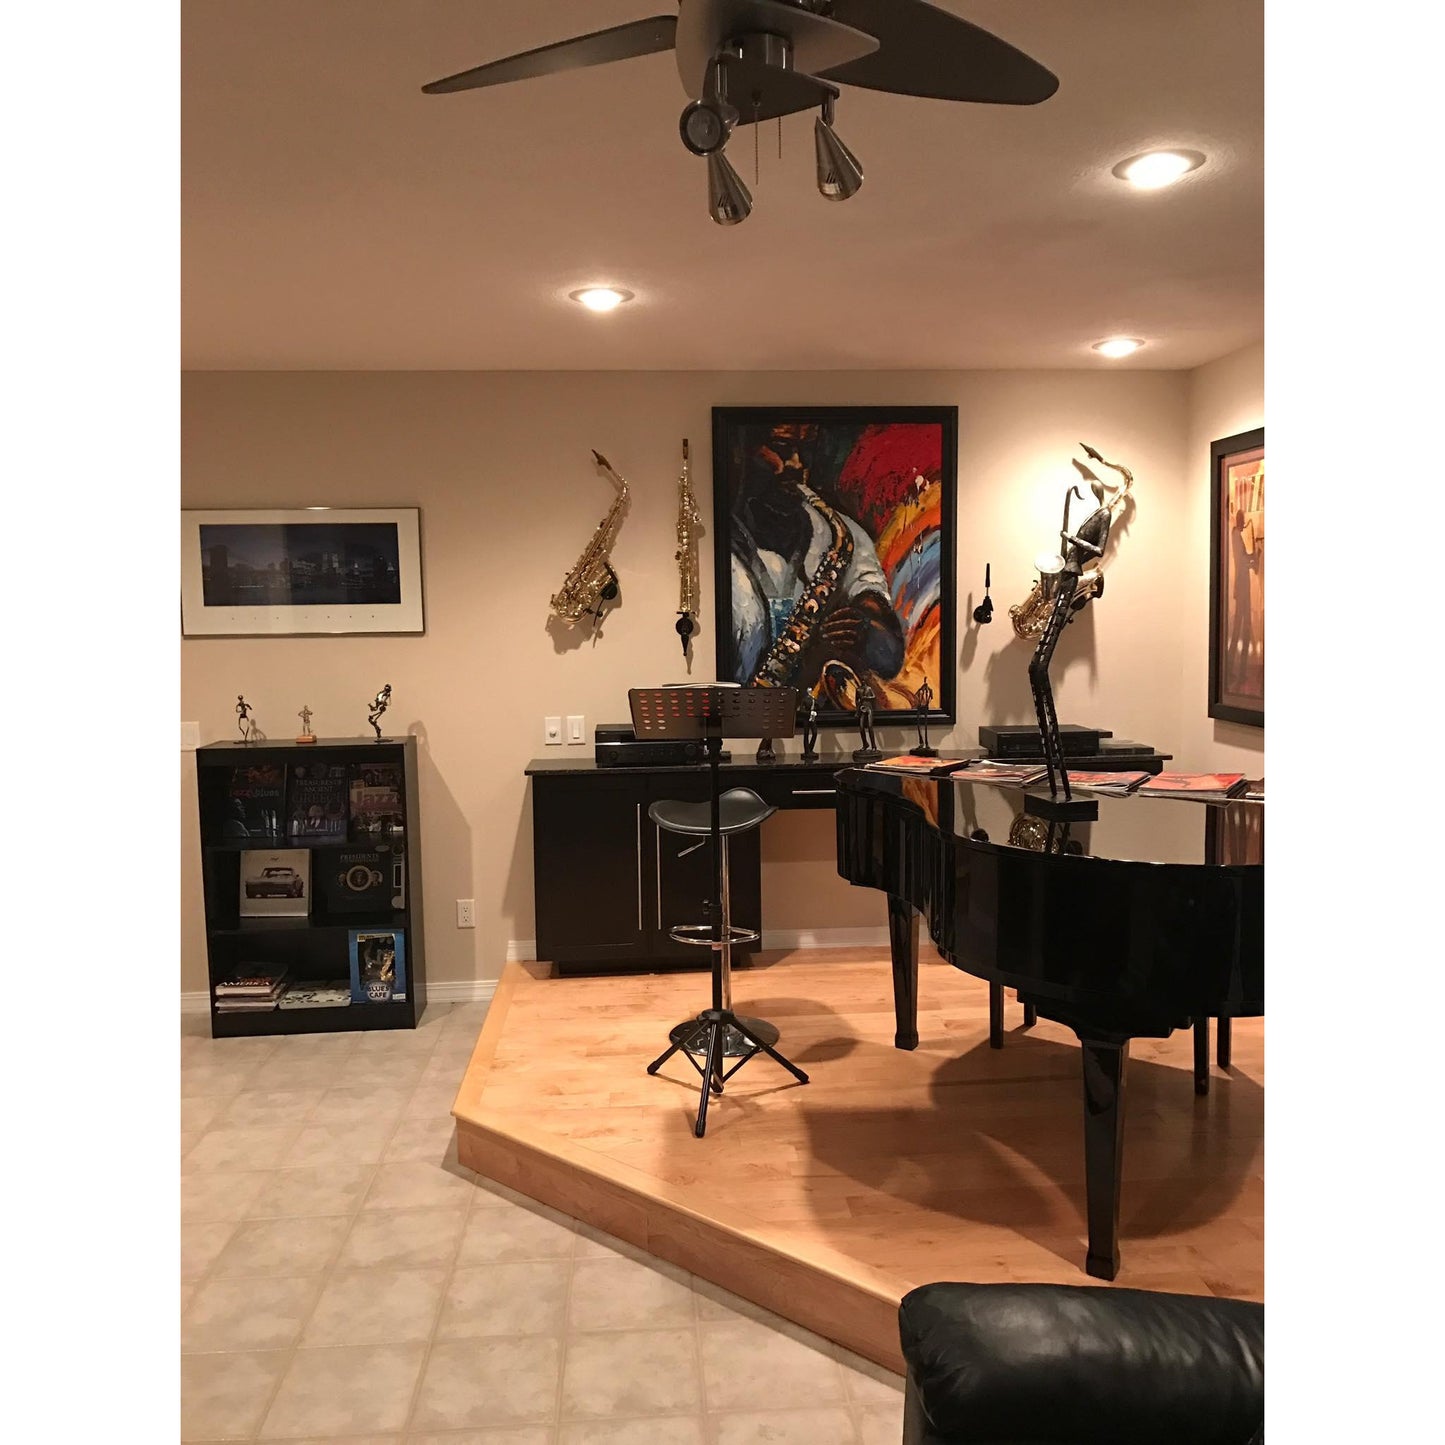 Locoparasaxo customer's luxurious music room or studio with grand piano and several saxophones mounted on the wall beside paintings and art 